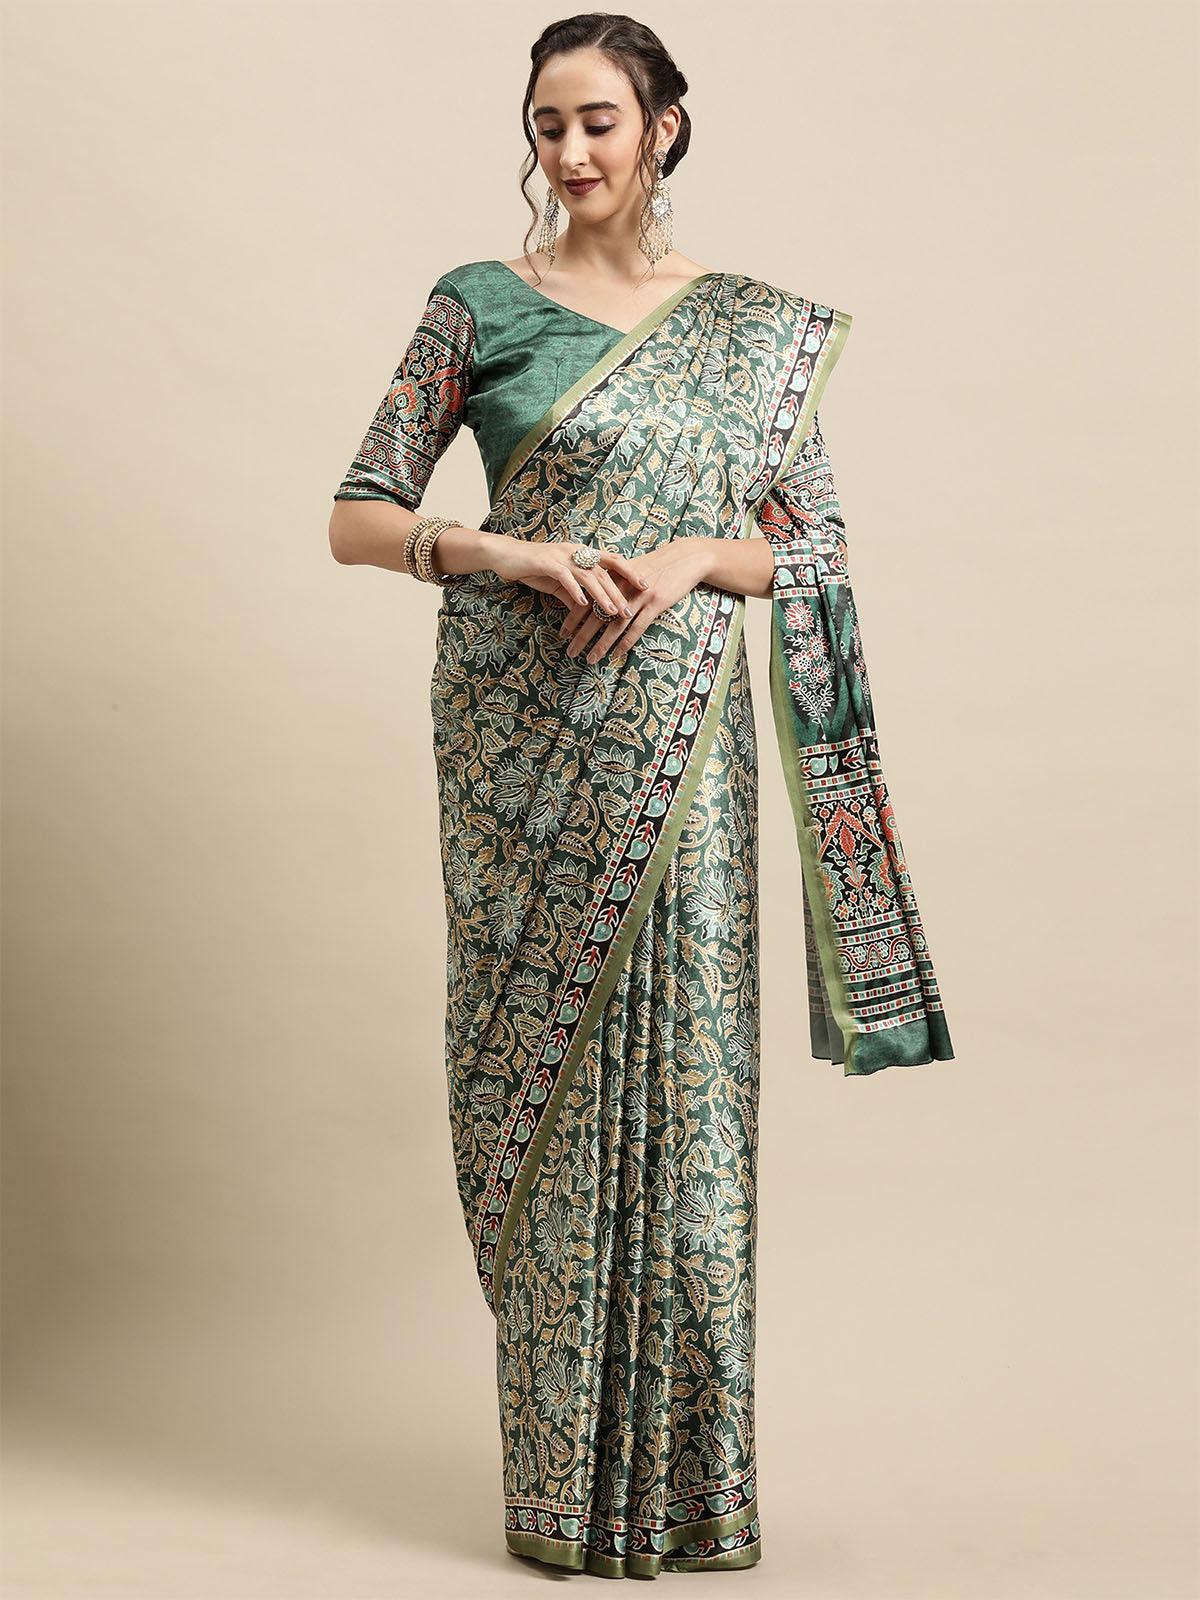 Women's Crepe Green Printed Designer Saree With Blouse Piece - Odette